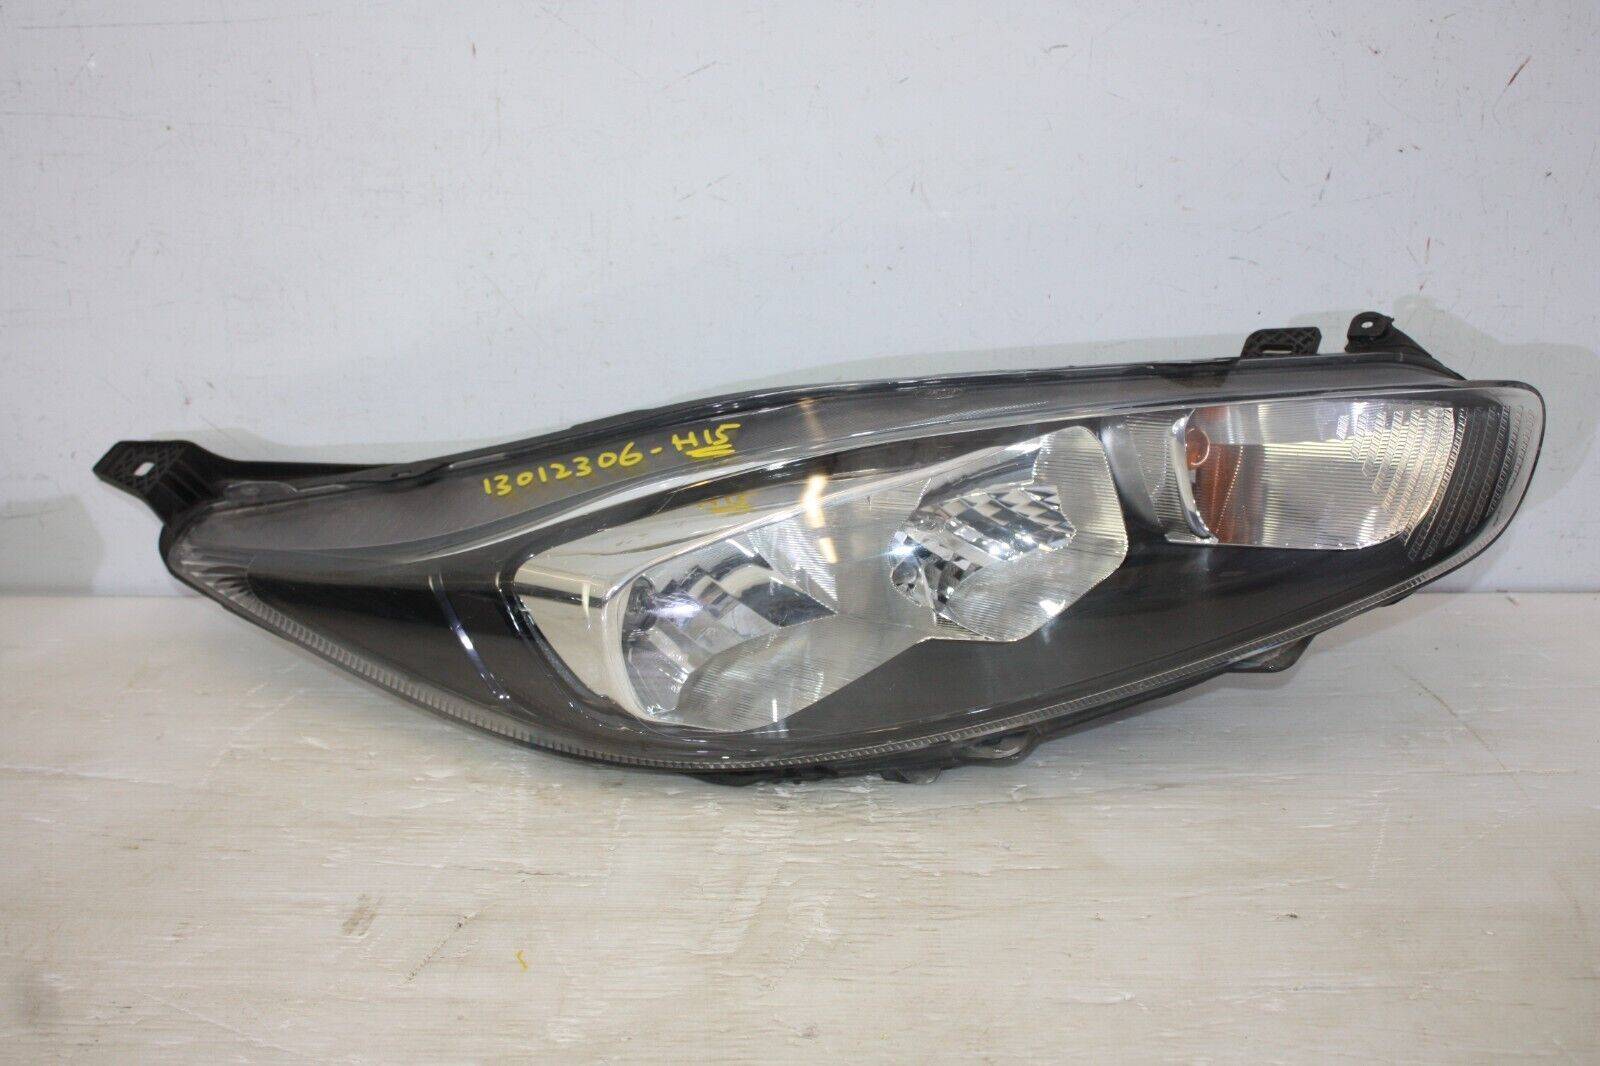 Ford Fiesta Right Side Headlight C1BB 13W029 BE Genuine SEE PICS 175572241537